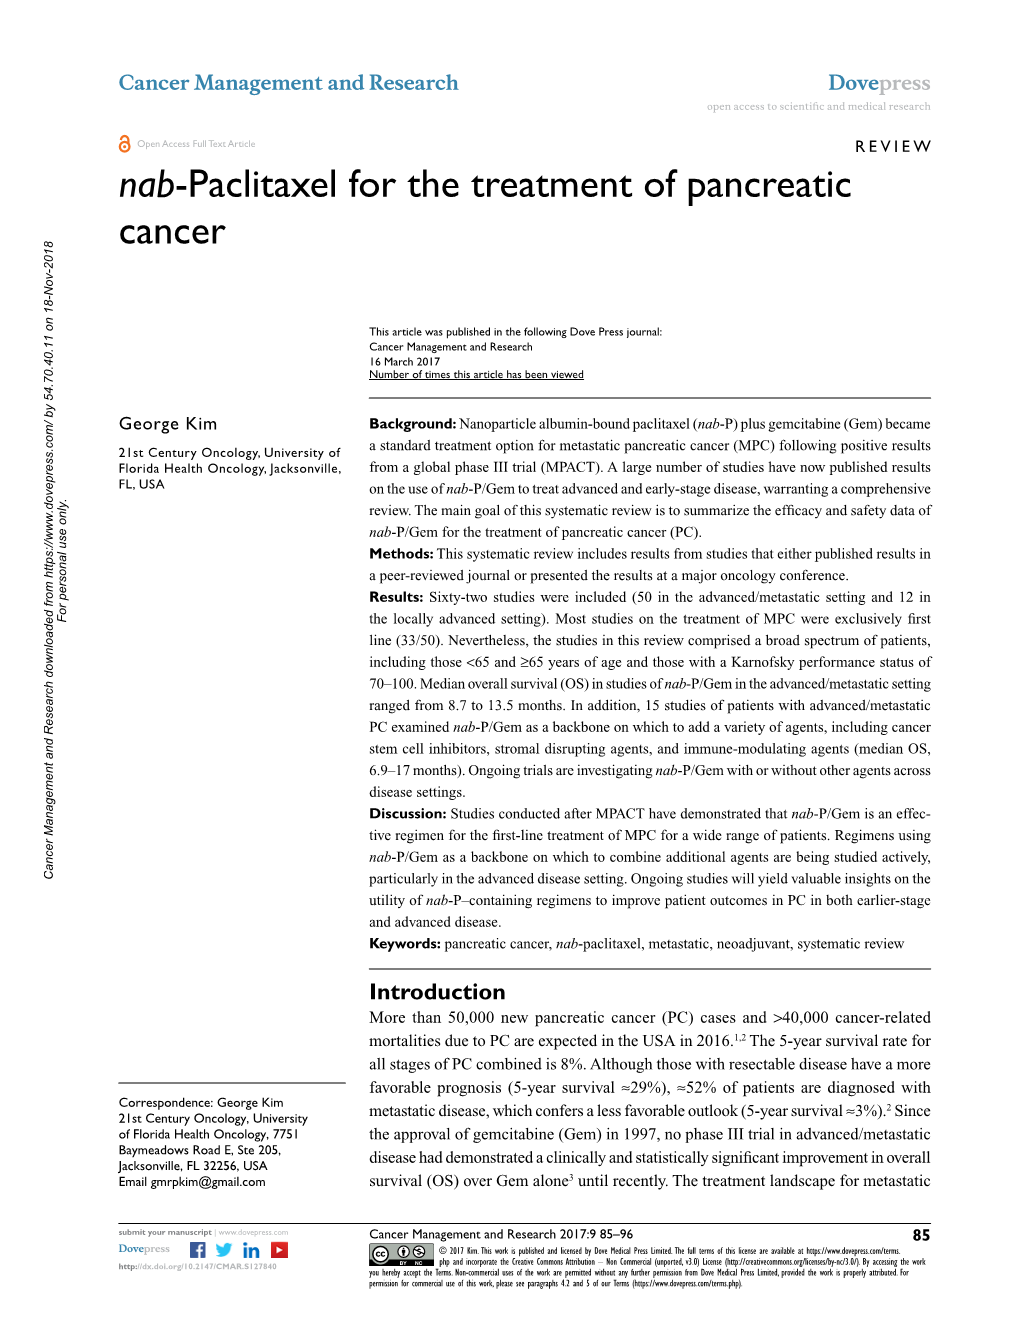 Nab-Paclitaxel for the Treatment of Pancreatic Cancer Open Access to Scientific and Medical Research DOI